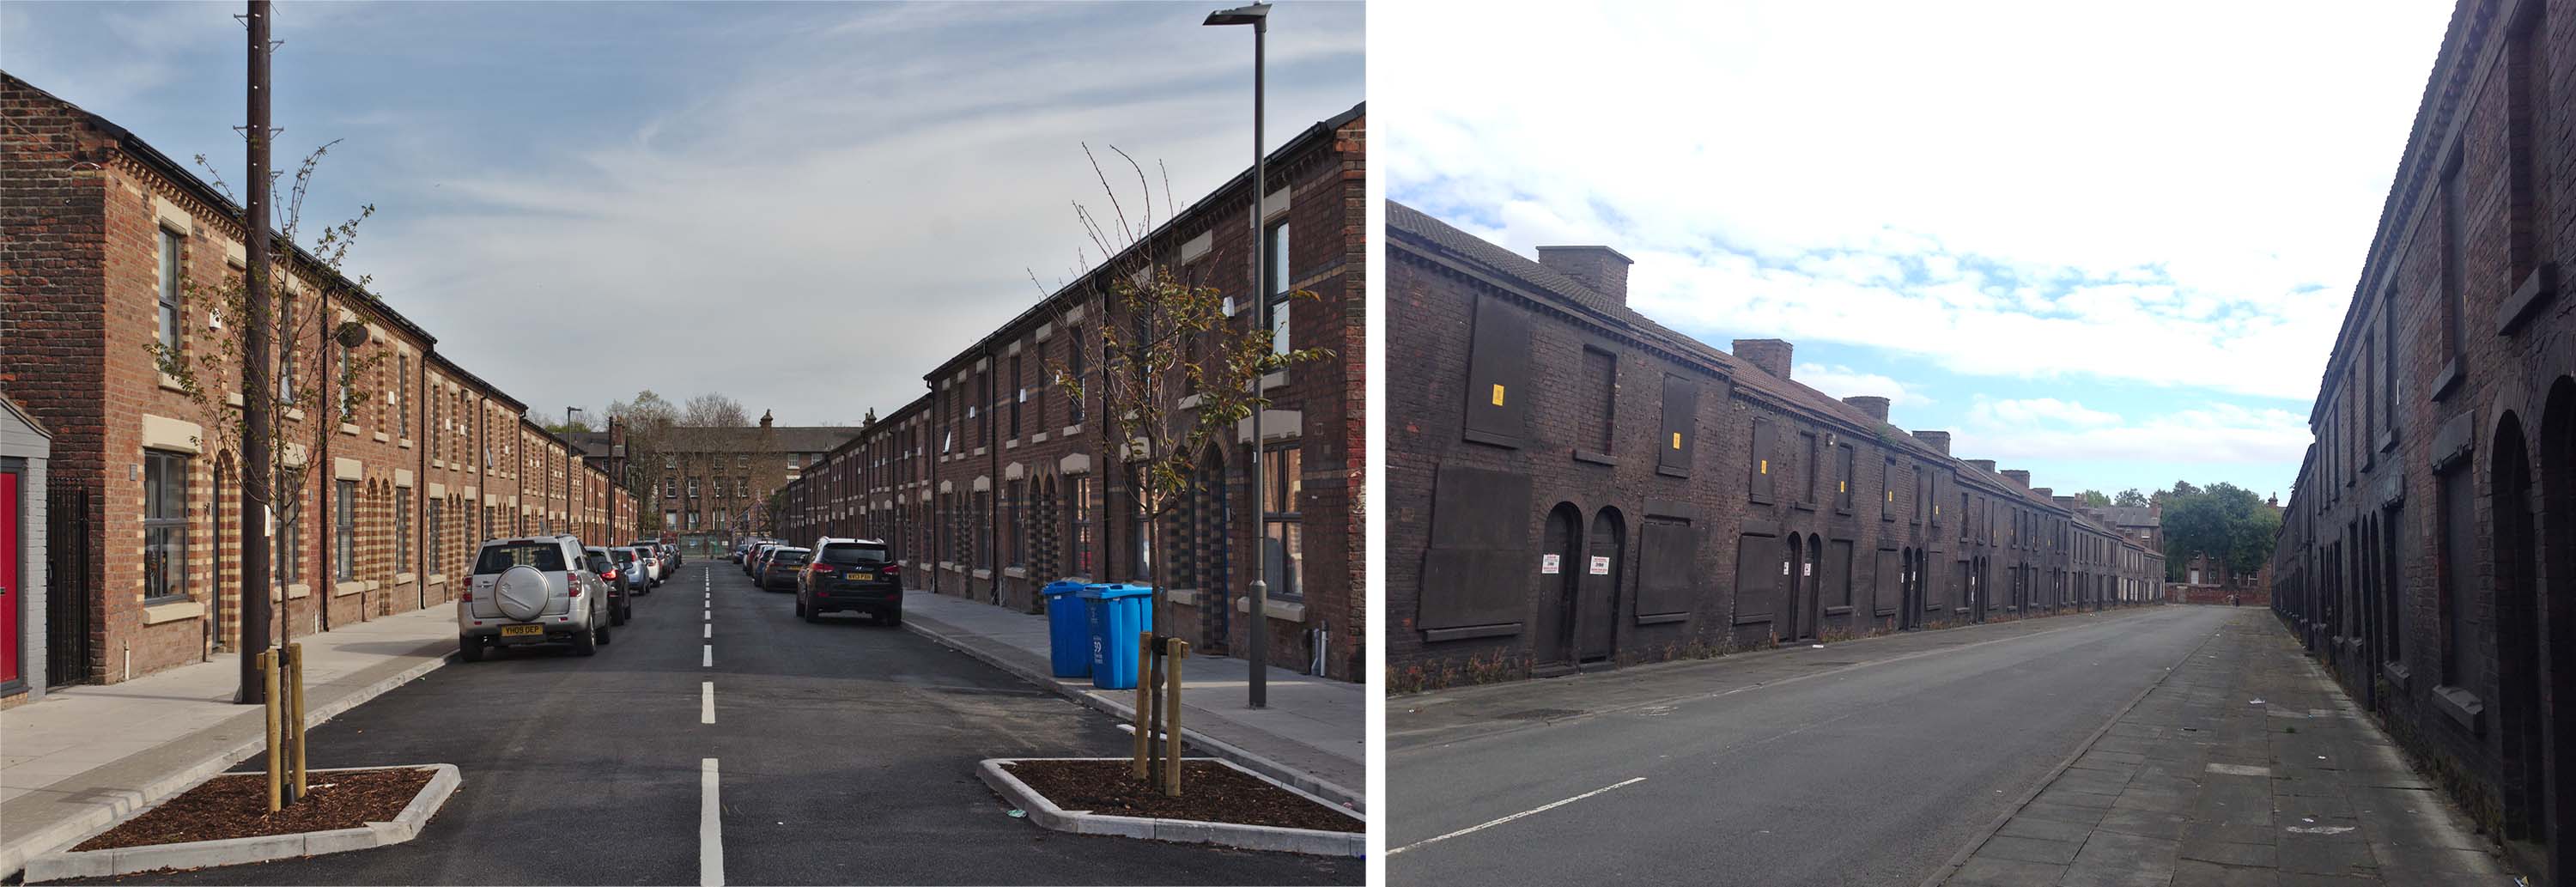 Side by side view of Powis Street before and after development